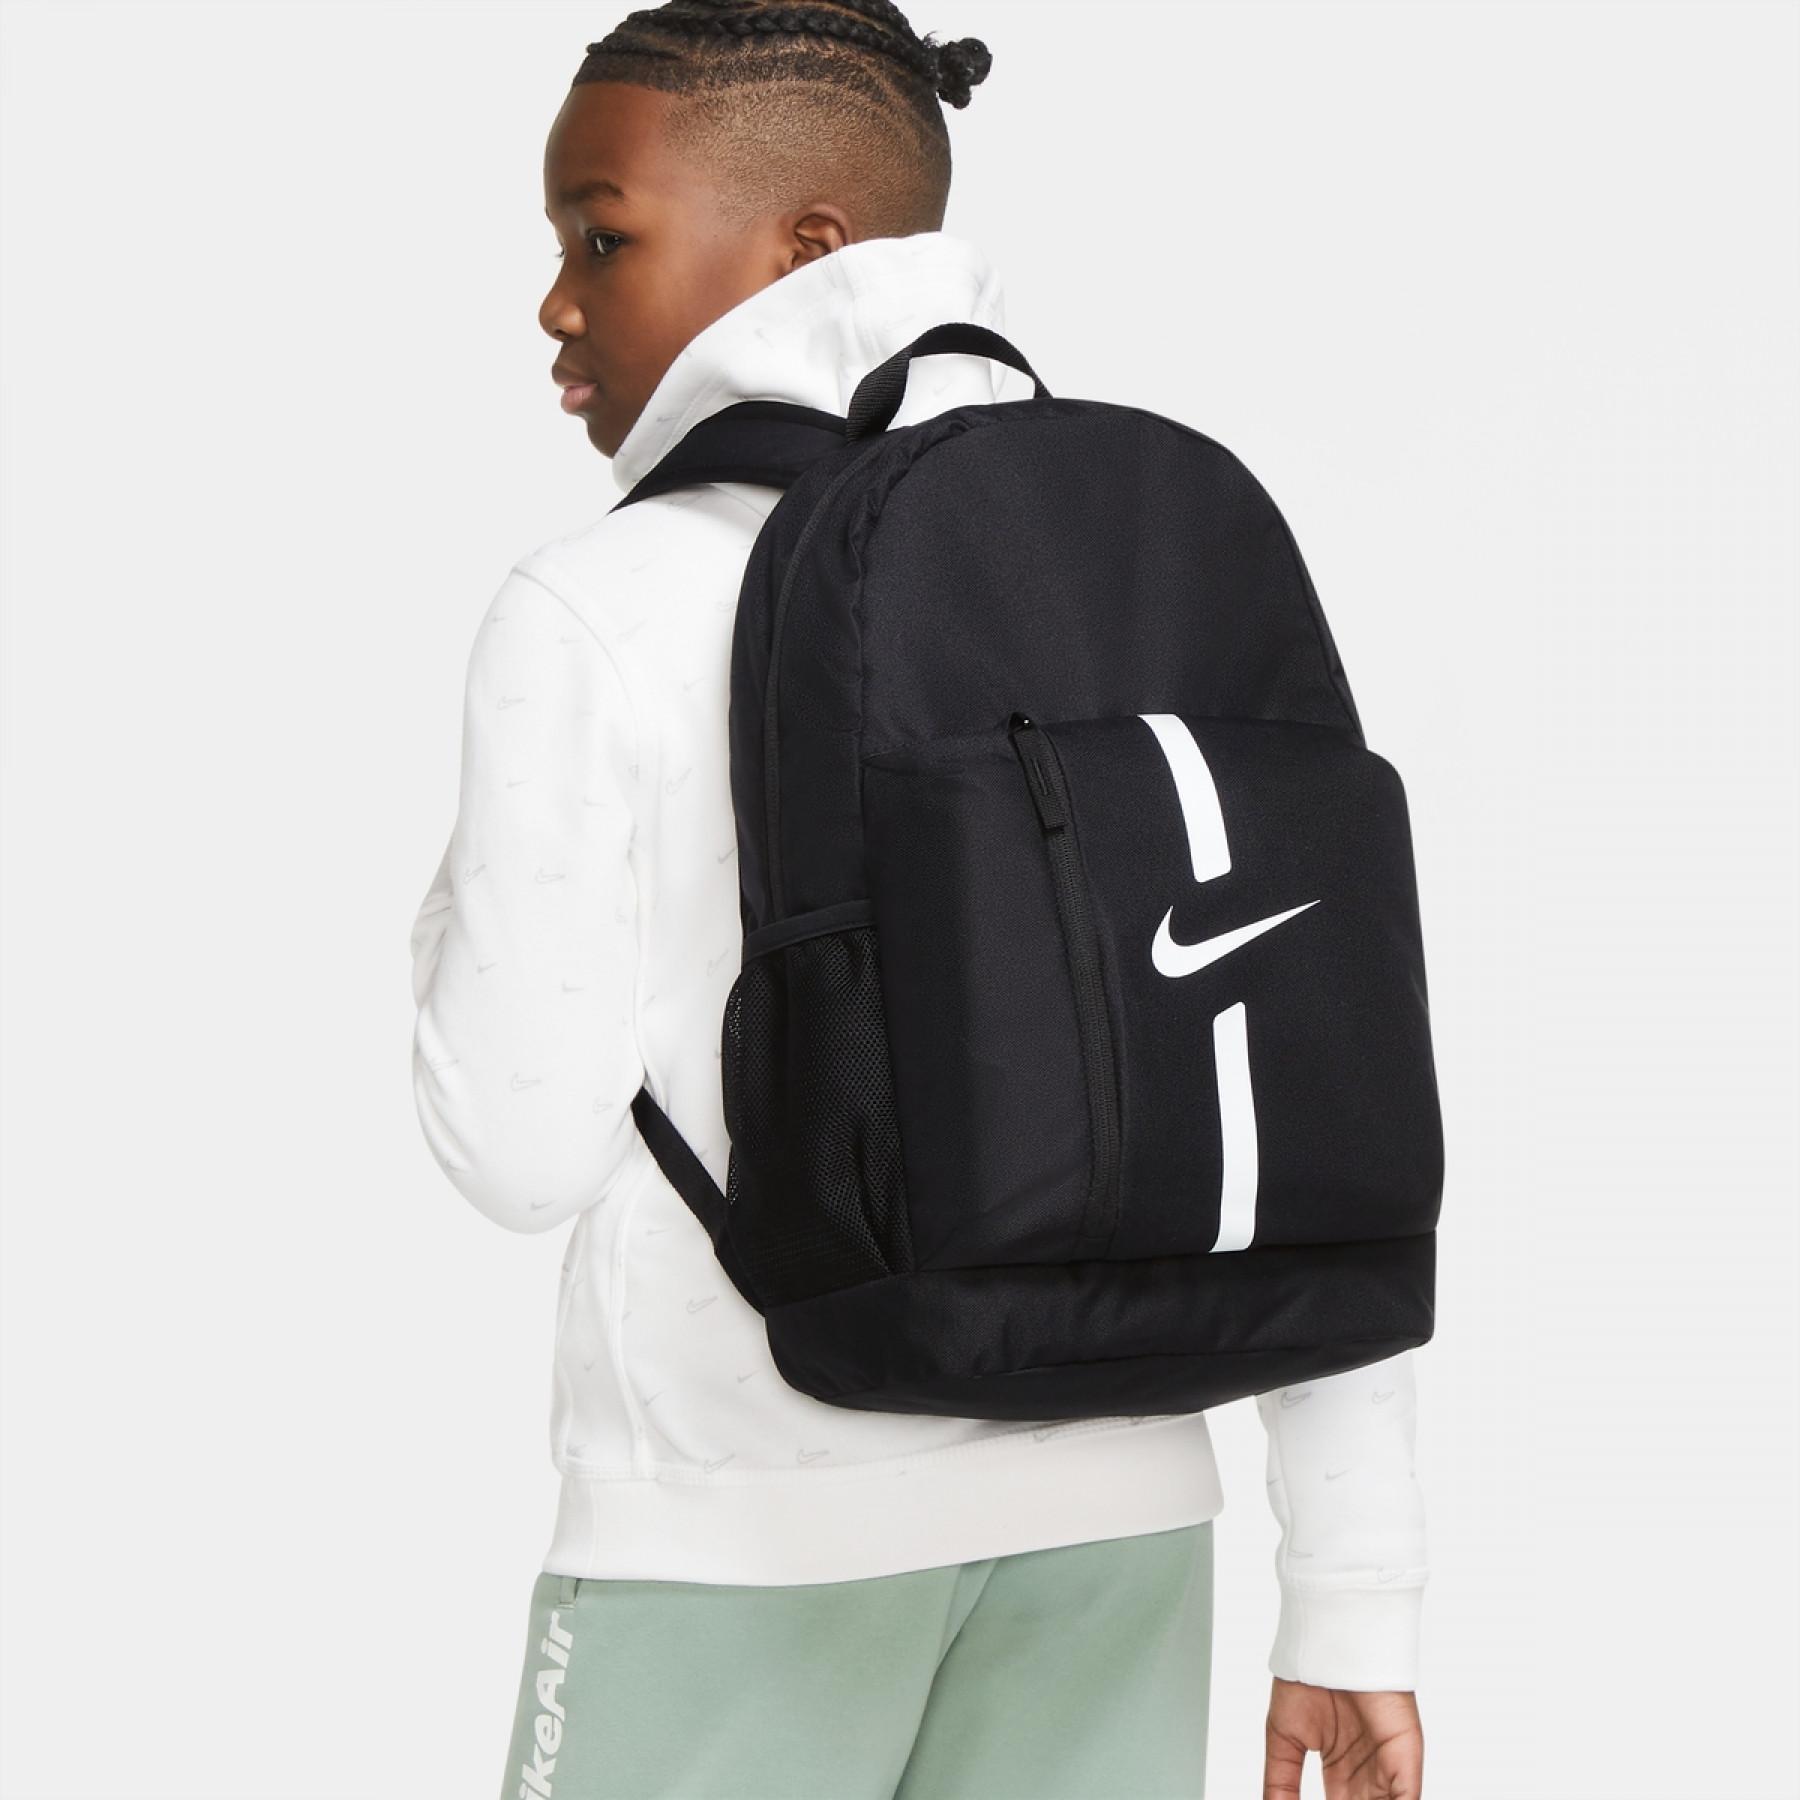 Children's backpack Nike Academy Team - Backpack - Sports Bags and ...